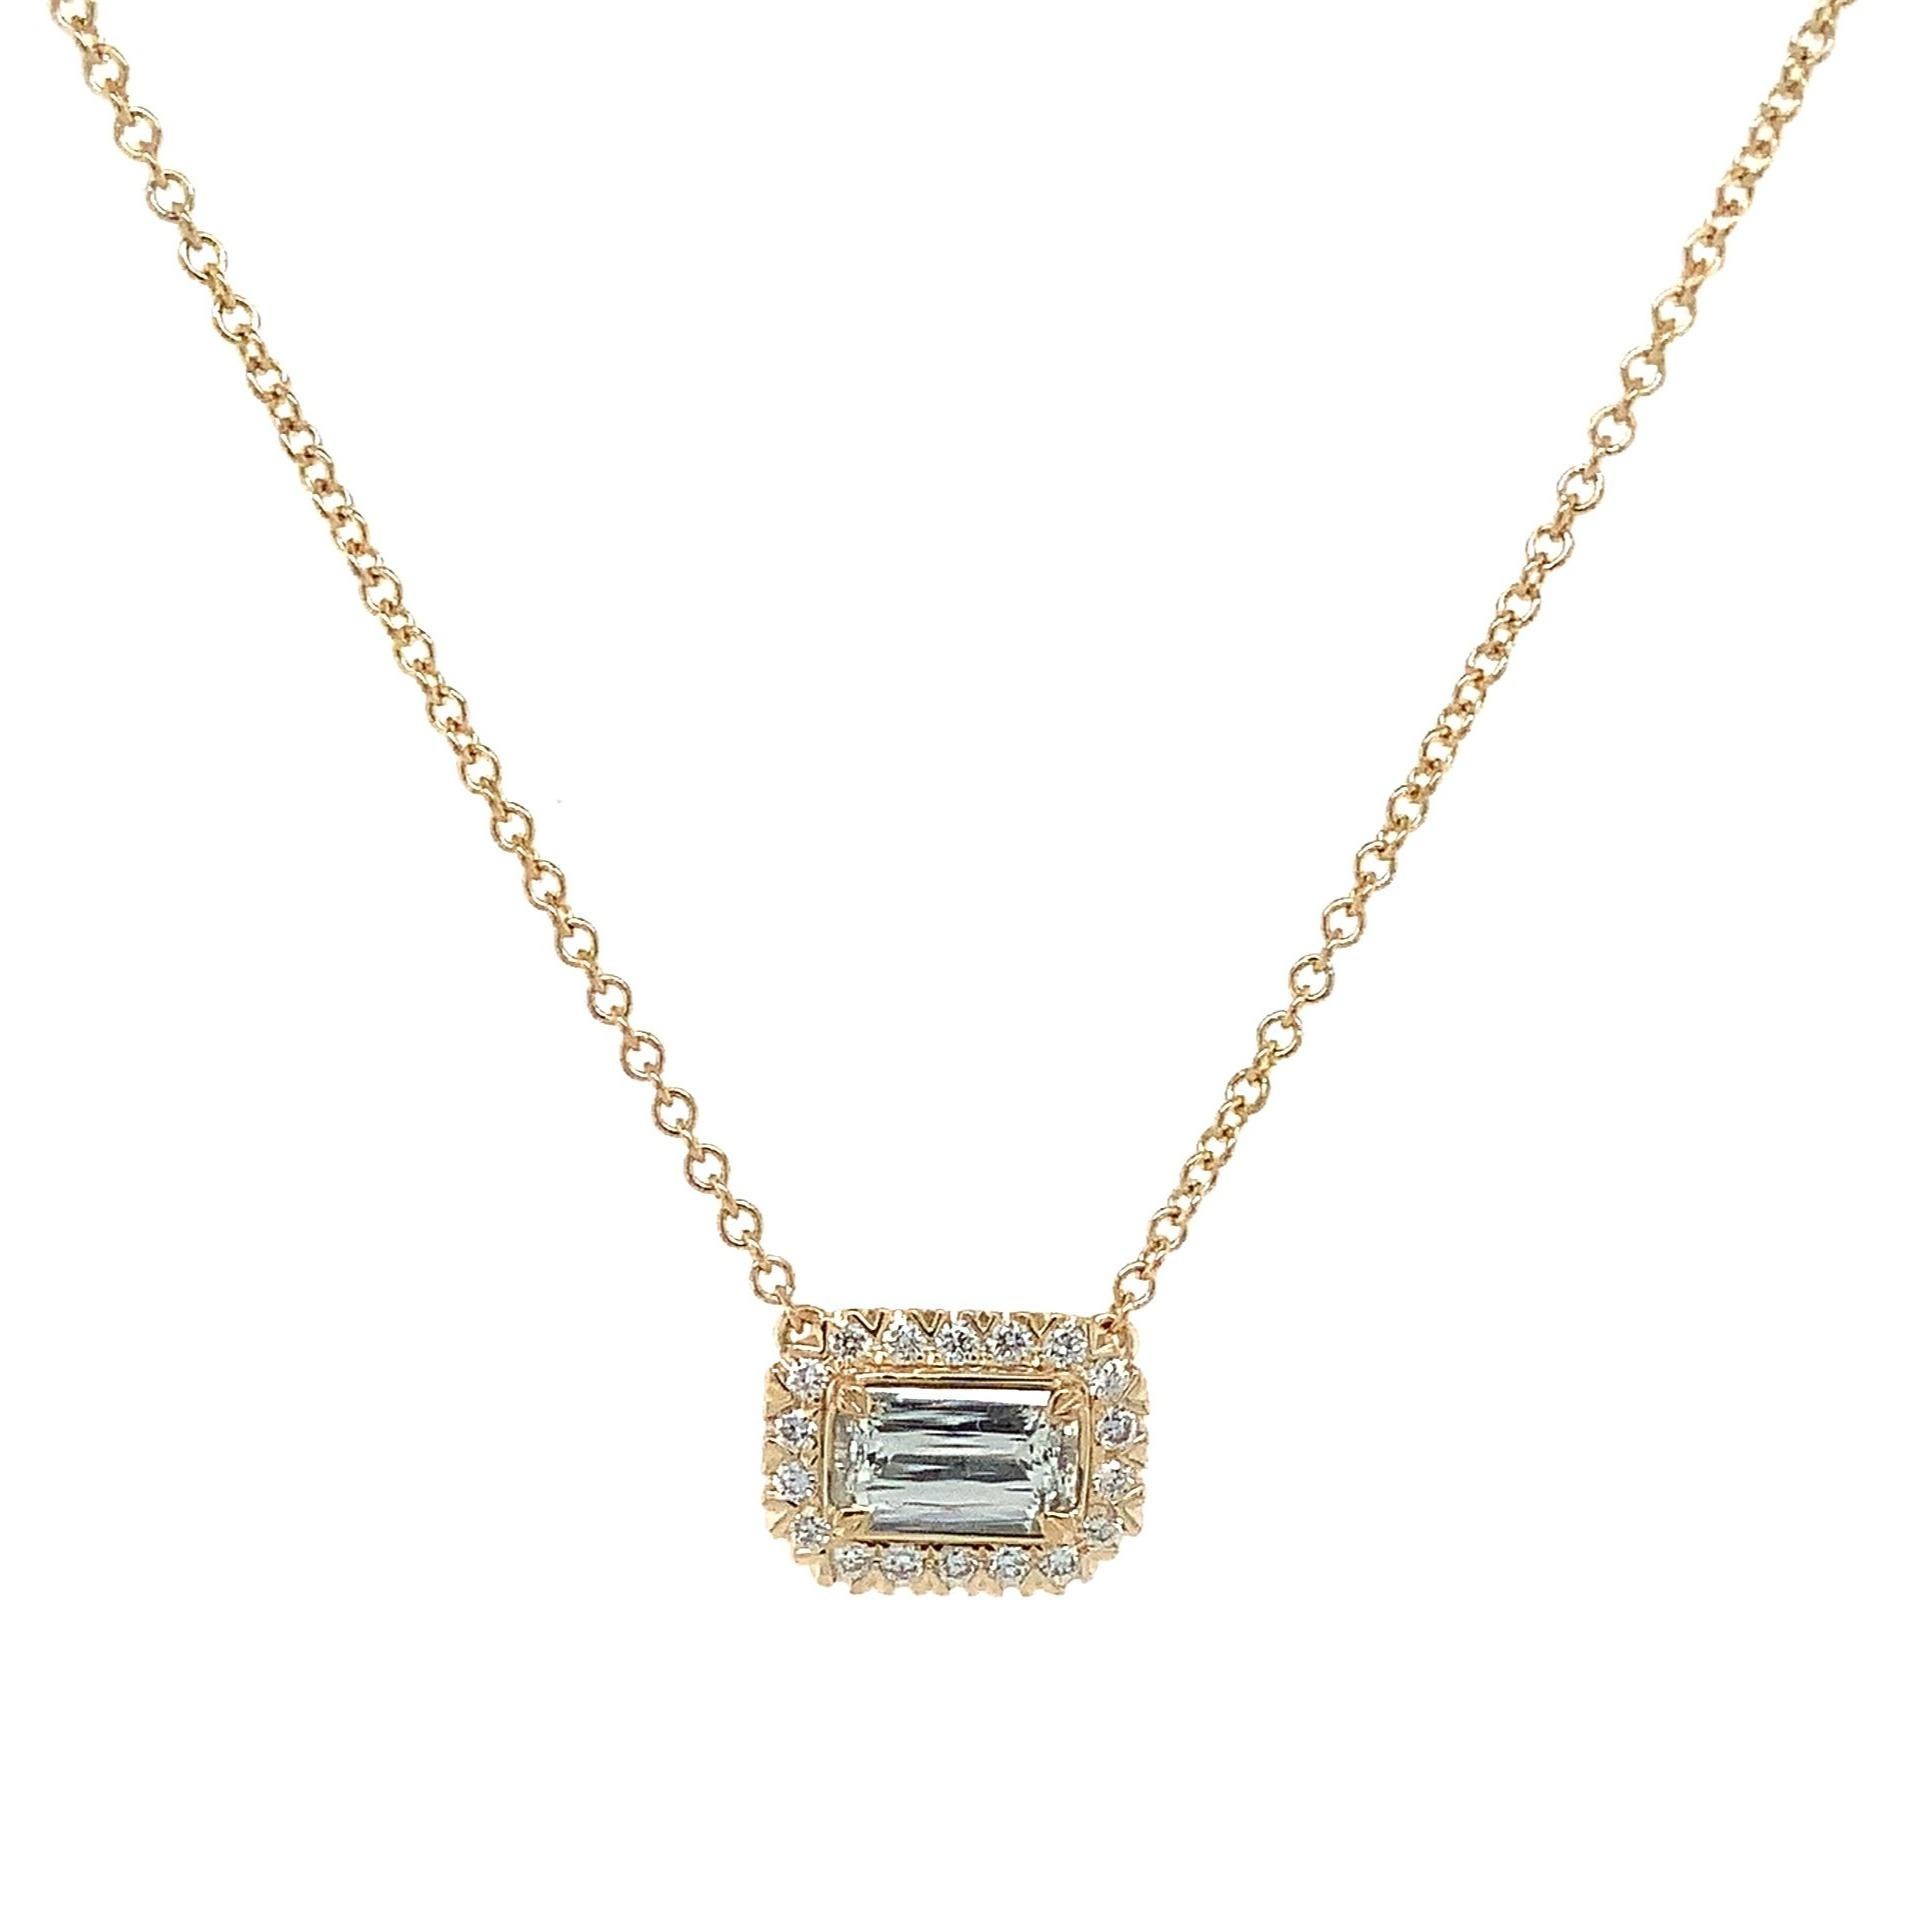 This exquisite Pendant from Christopher Designs features a 0.65 ct. L'Amour Crisscut® Diamond in G Color VS Clarity, and is flanked by 0.14 ct. t.w. of Brilliant Melee, for a total carat weight of 0.79 cts. Set in 18 kt Yellow Gold, the 10.5 mm x